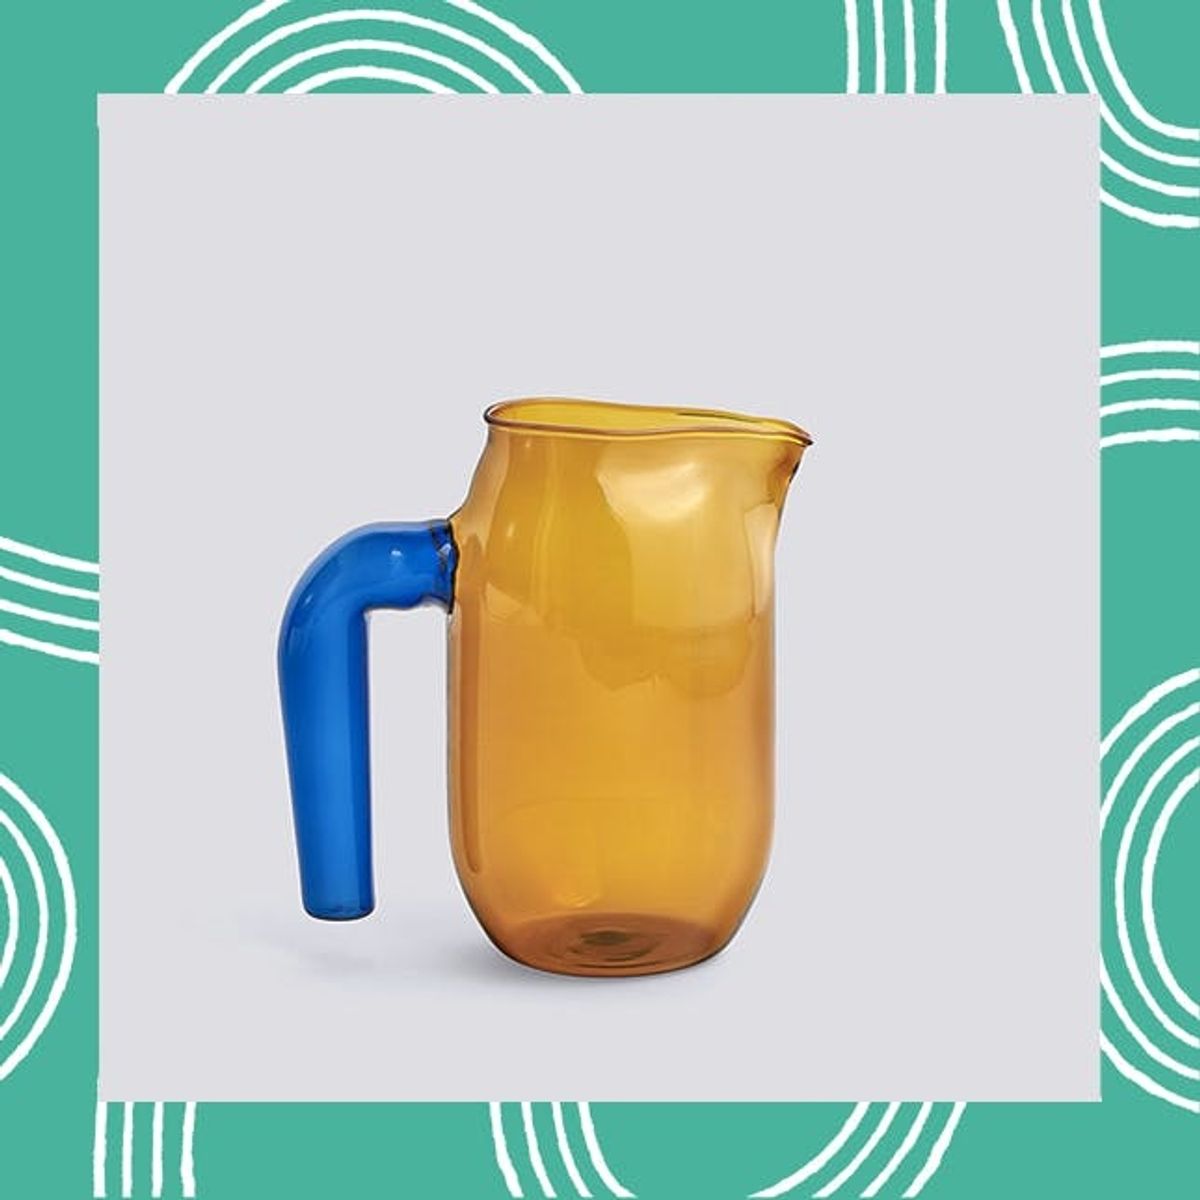 12 Colored-Glass Drinkware Options to Zhuzh Your Cabinetry